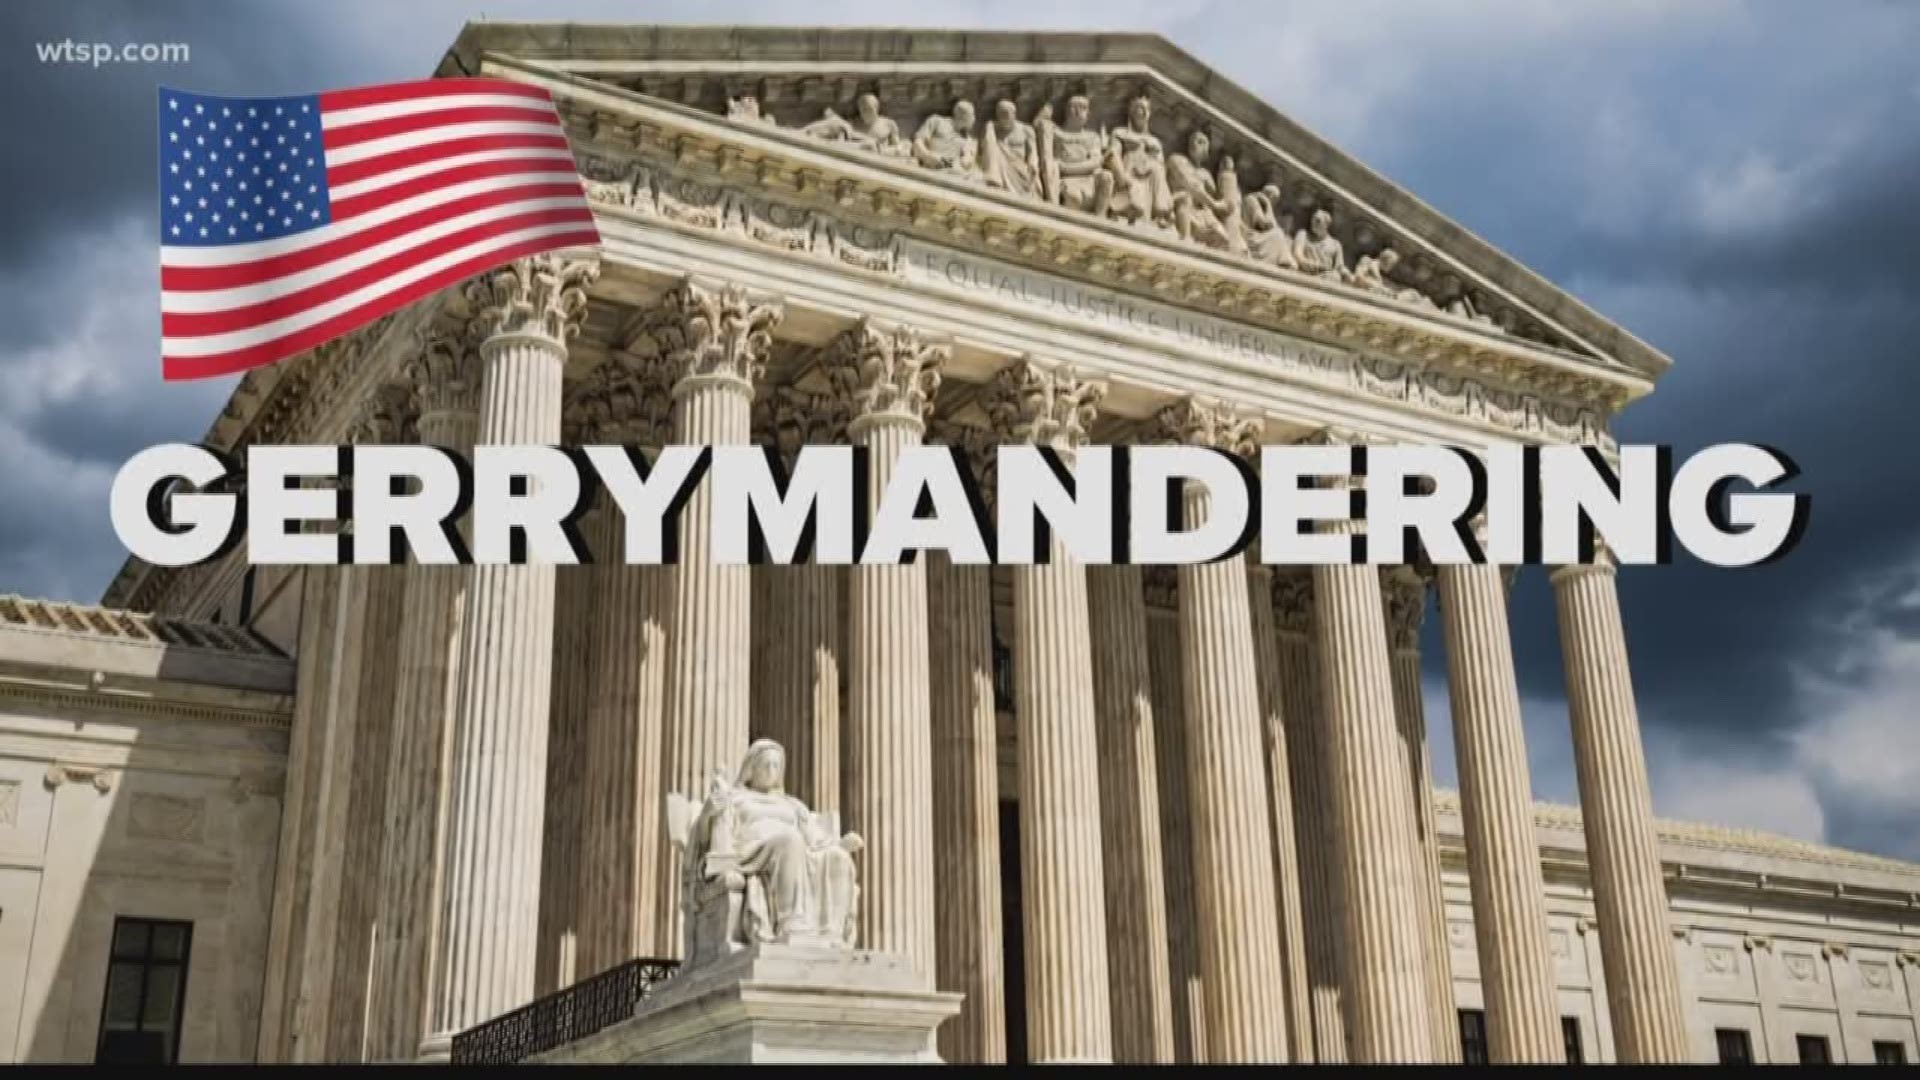 The U.S. Supreme Court has declined five times to intervene in partisan gerrymandering cases.